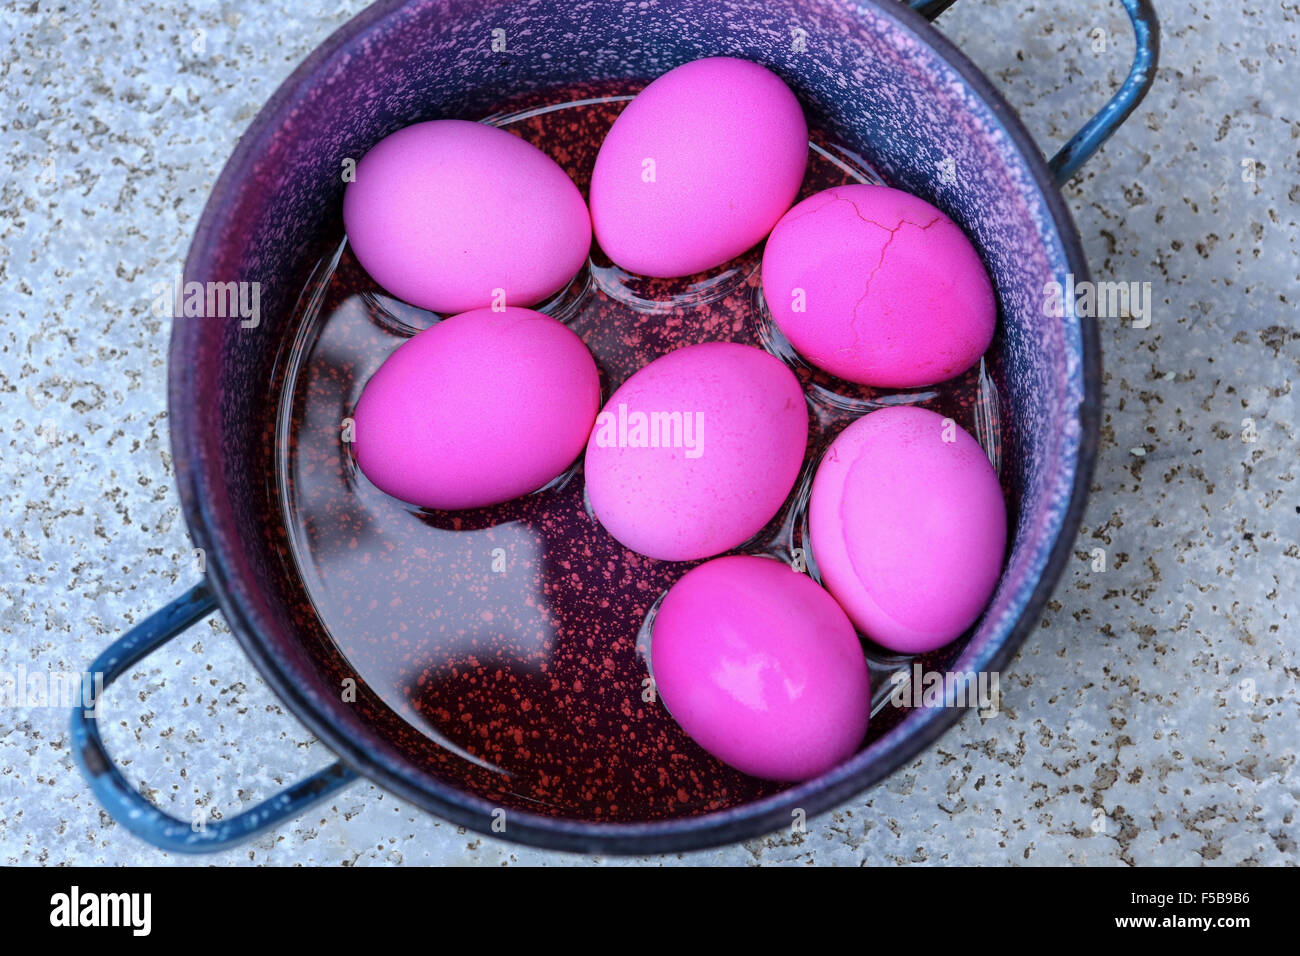 red hard boiled eggs (dyed with beetroot) a good start for Easter eggs (dyed with beetroot) This image has a restriction for lic Stock Photo